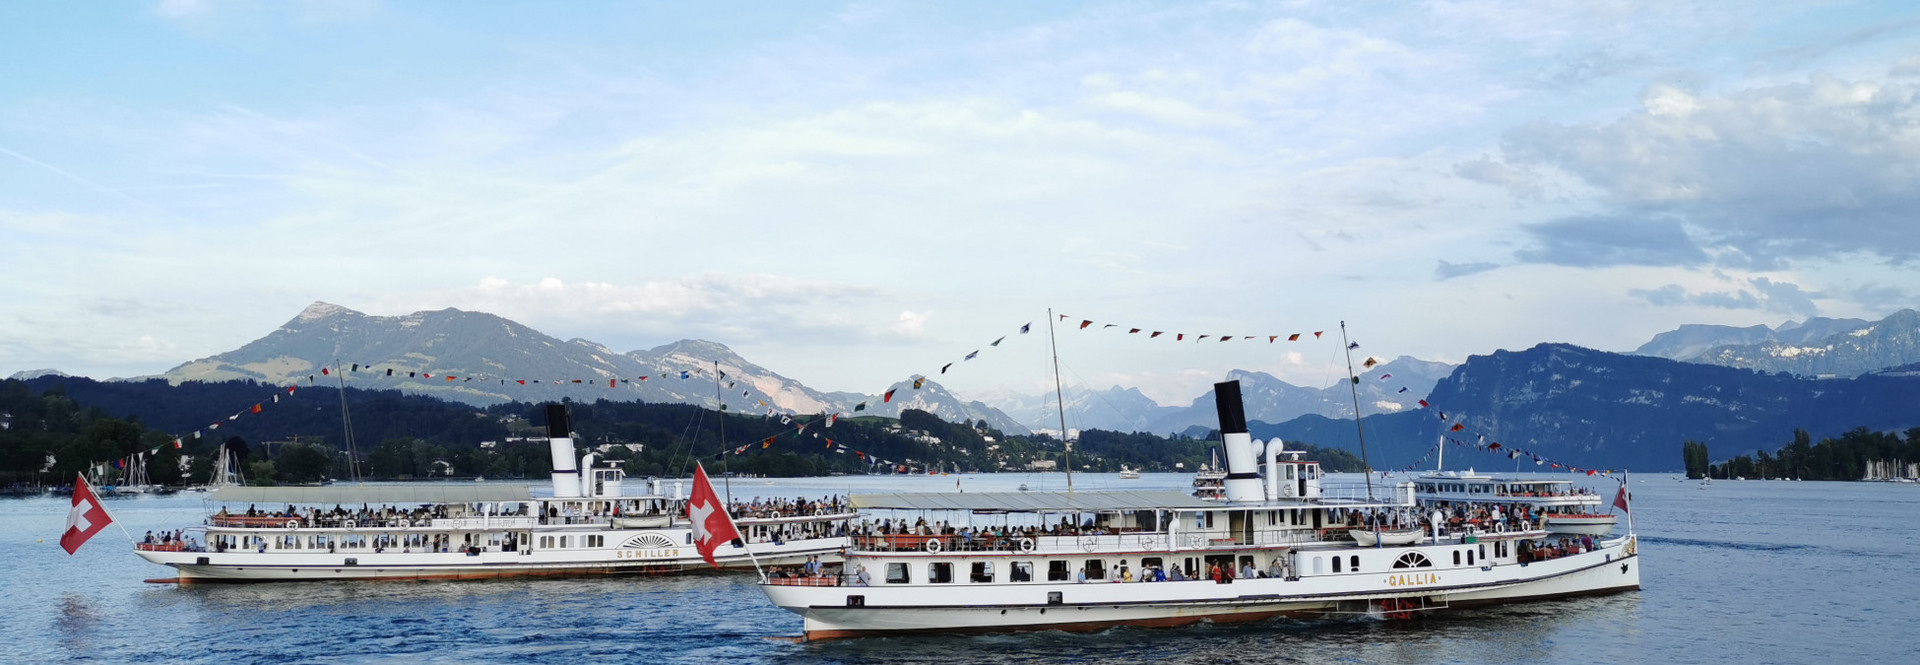 On august 1, the paddle steamer Gallia and Schiller are also out on Lake Lucerne in the evening.